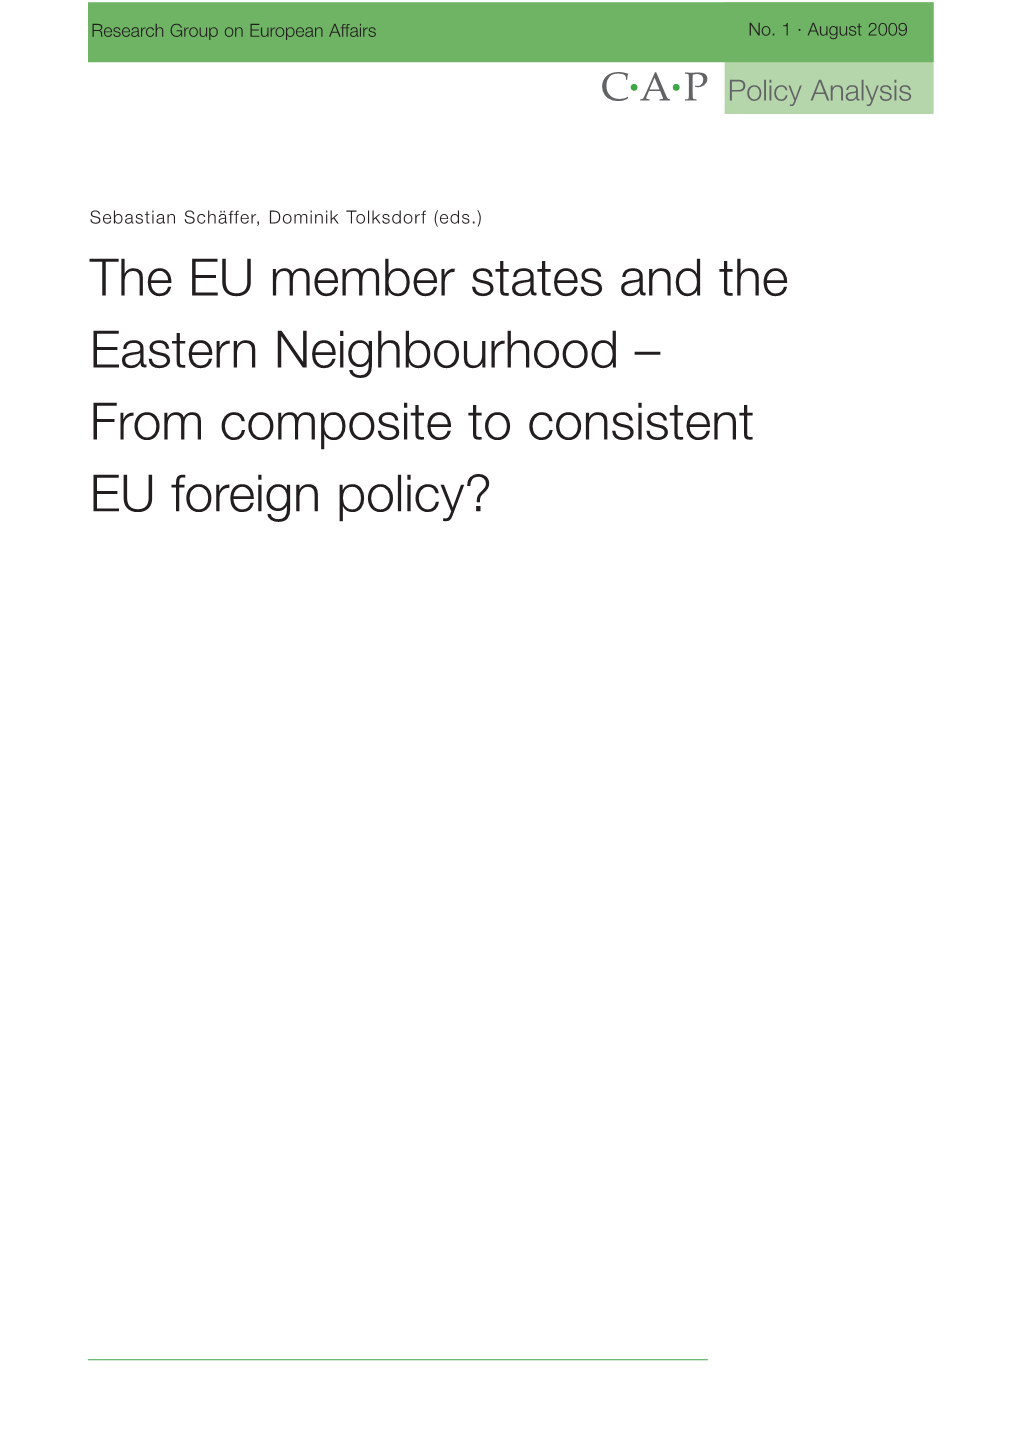 The EU Member States and the Eastern Neighbourhood – from Composite to Consistent EU Foreign Policy?